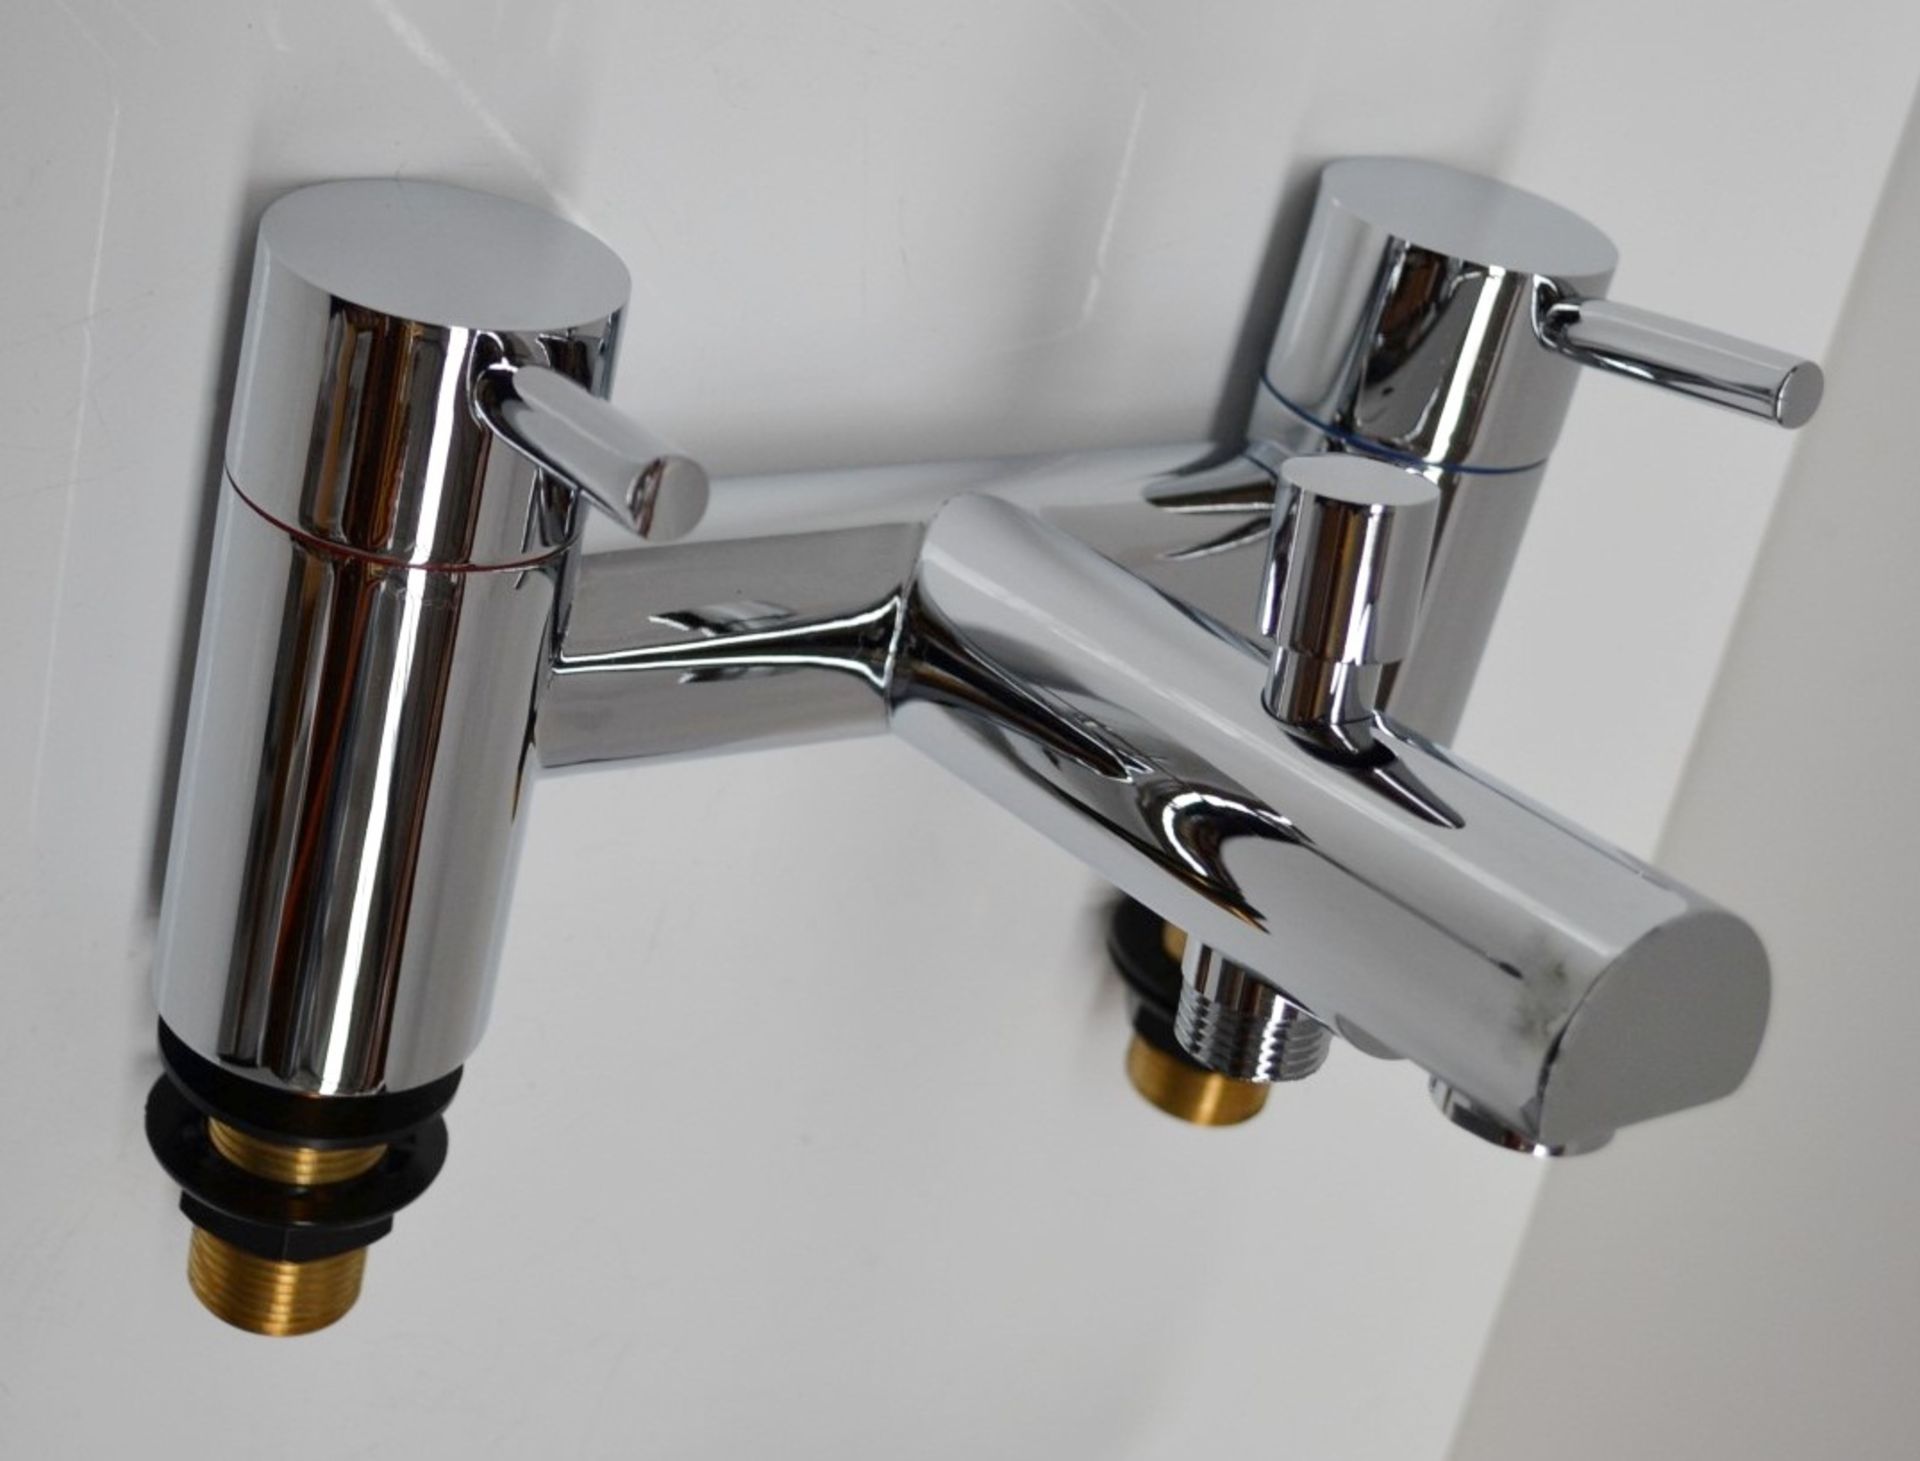 1 x Matrix Bath Mixer Tap - Featuring Modern Style With A Round Shape - Ref: MBI031 - CL190 - Unused - Image 5 of 8